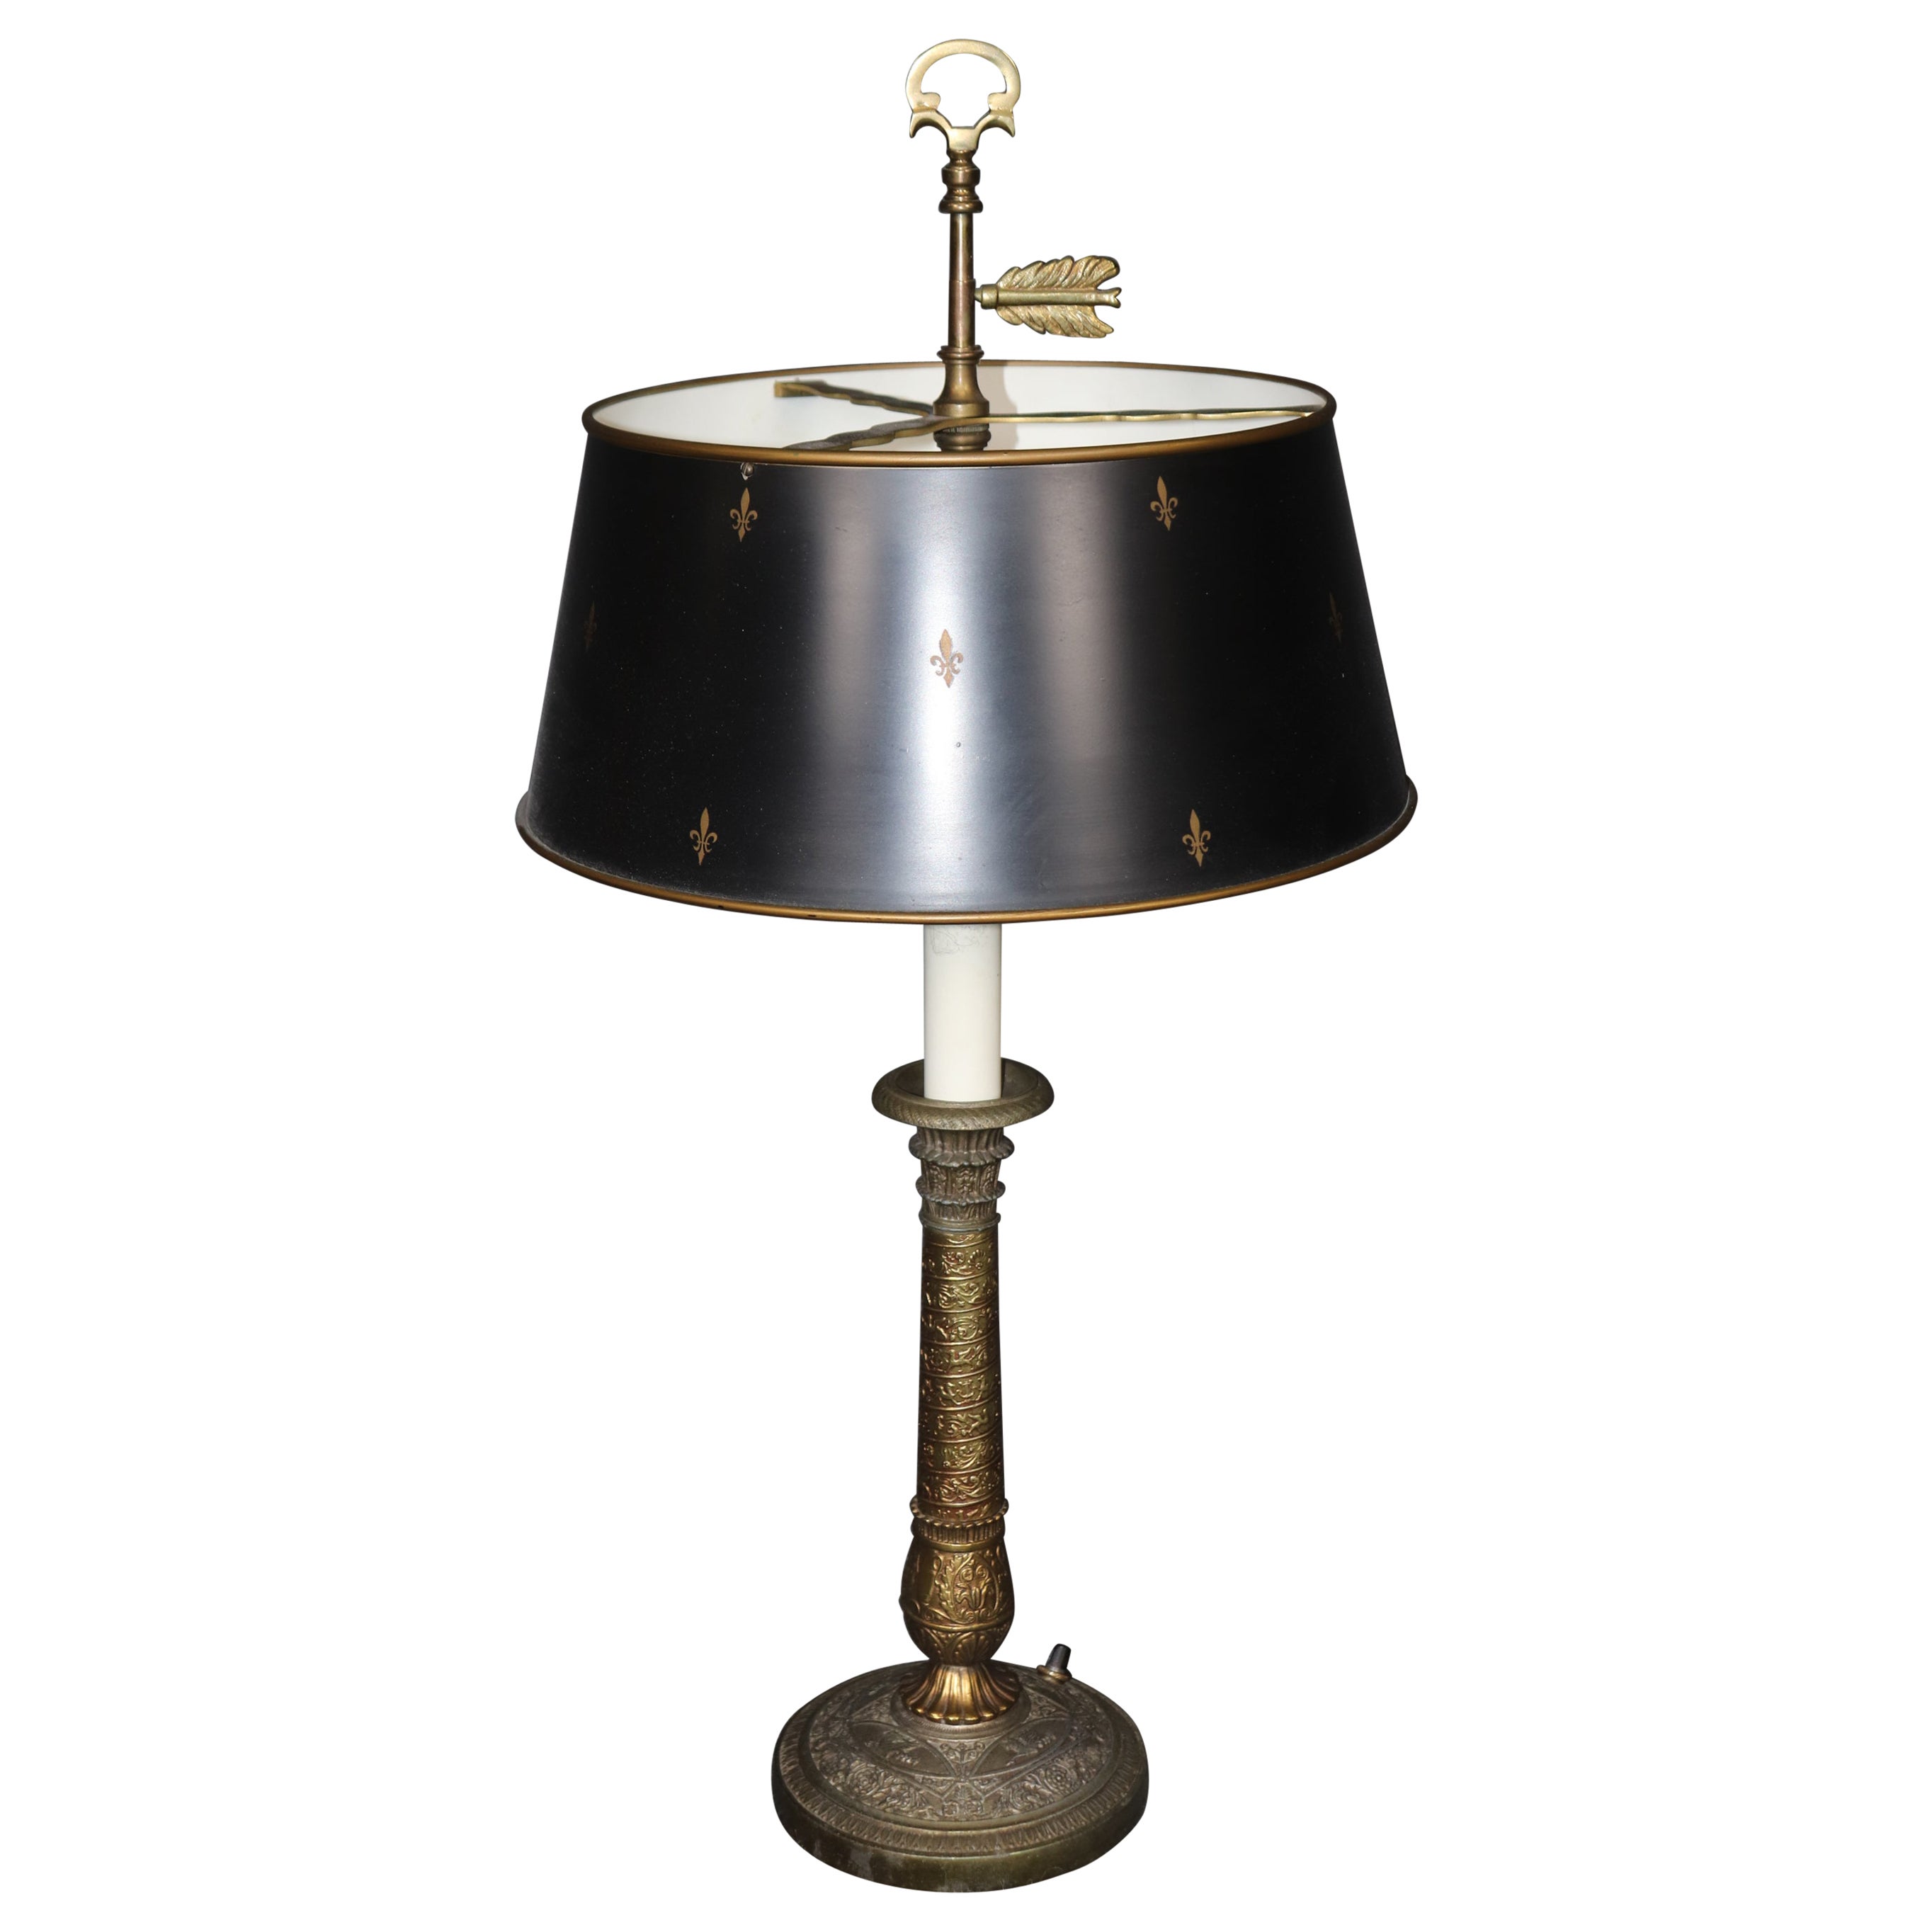 Fine Quality Aged Brass French Table or Bouillotte Lamp with shades